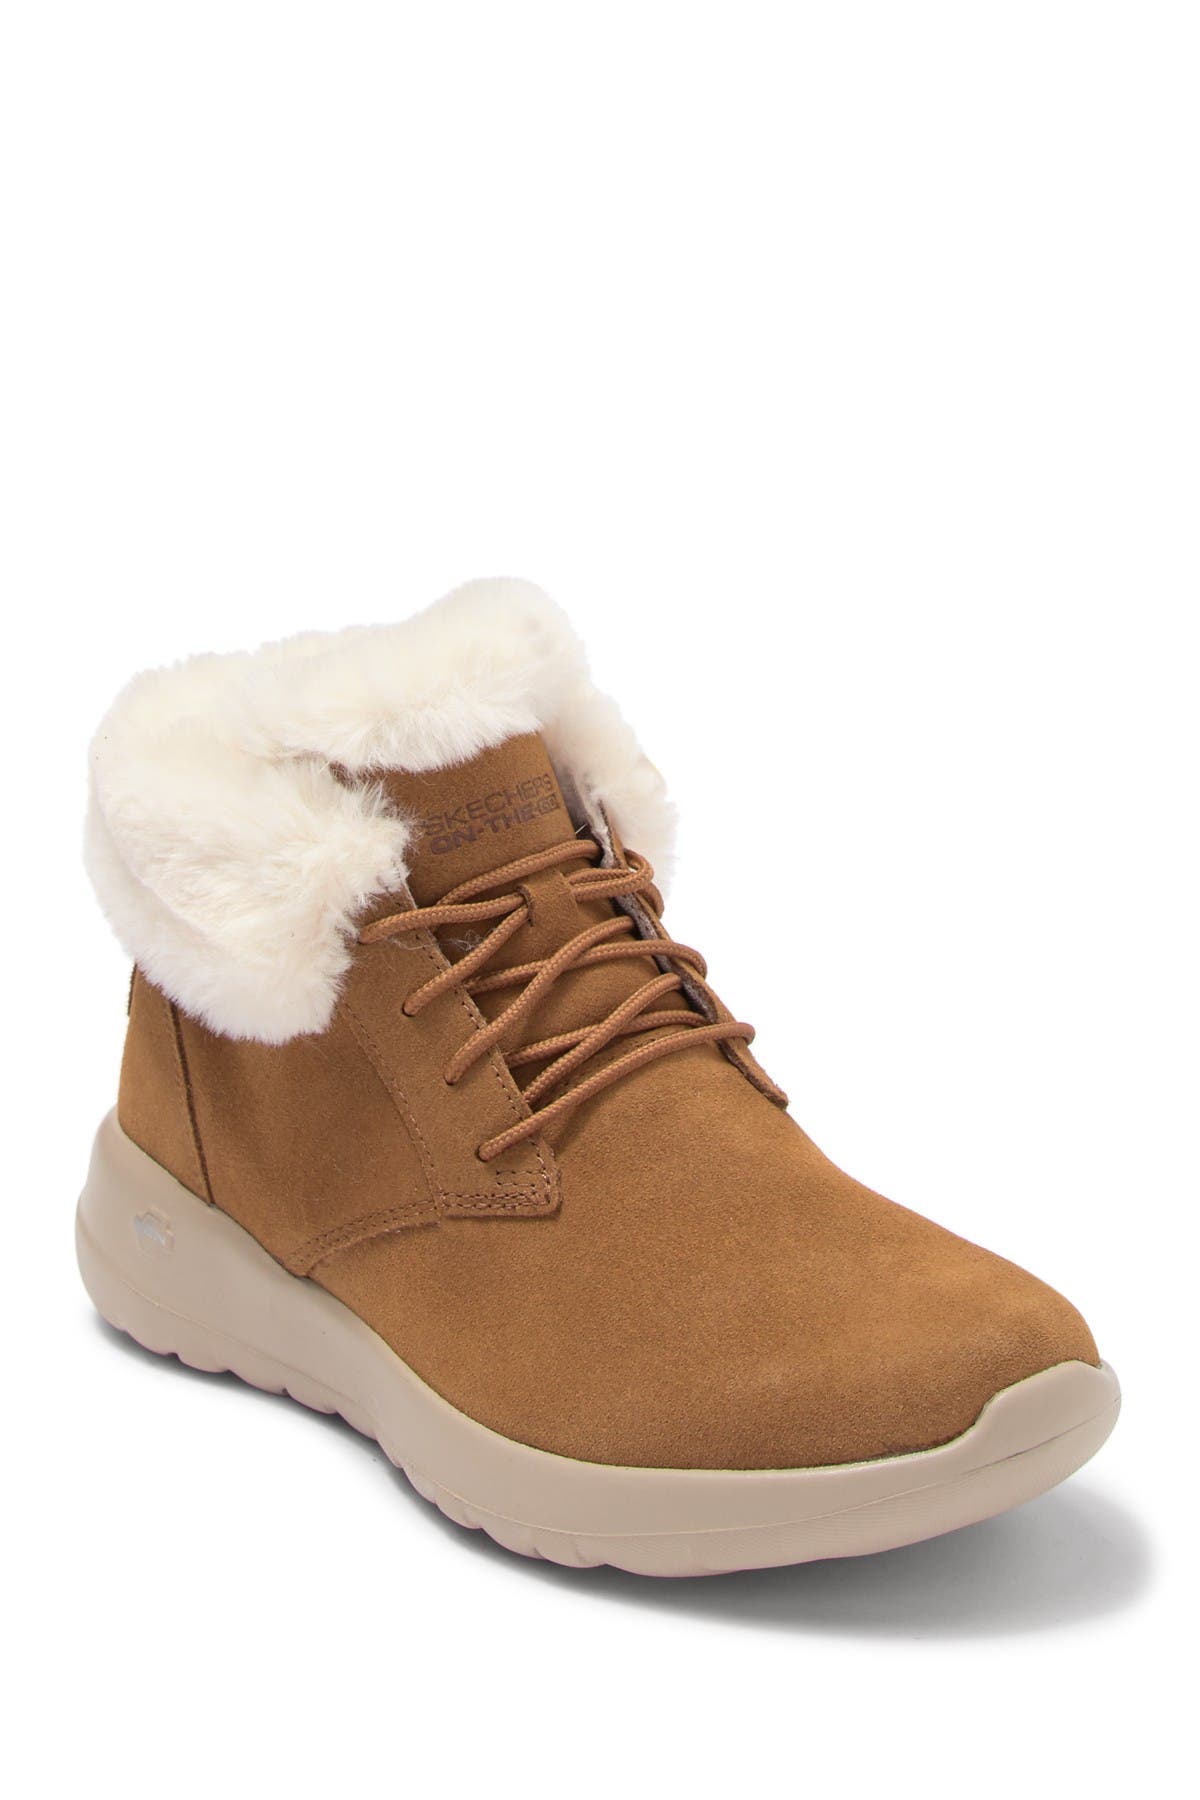 skechers boots fur lined